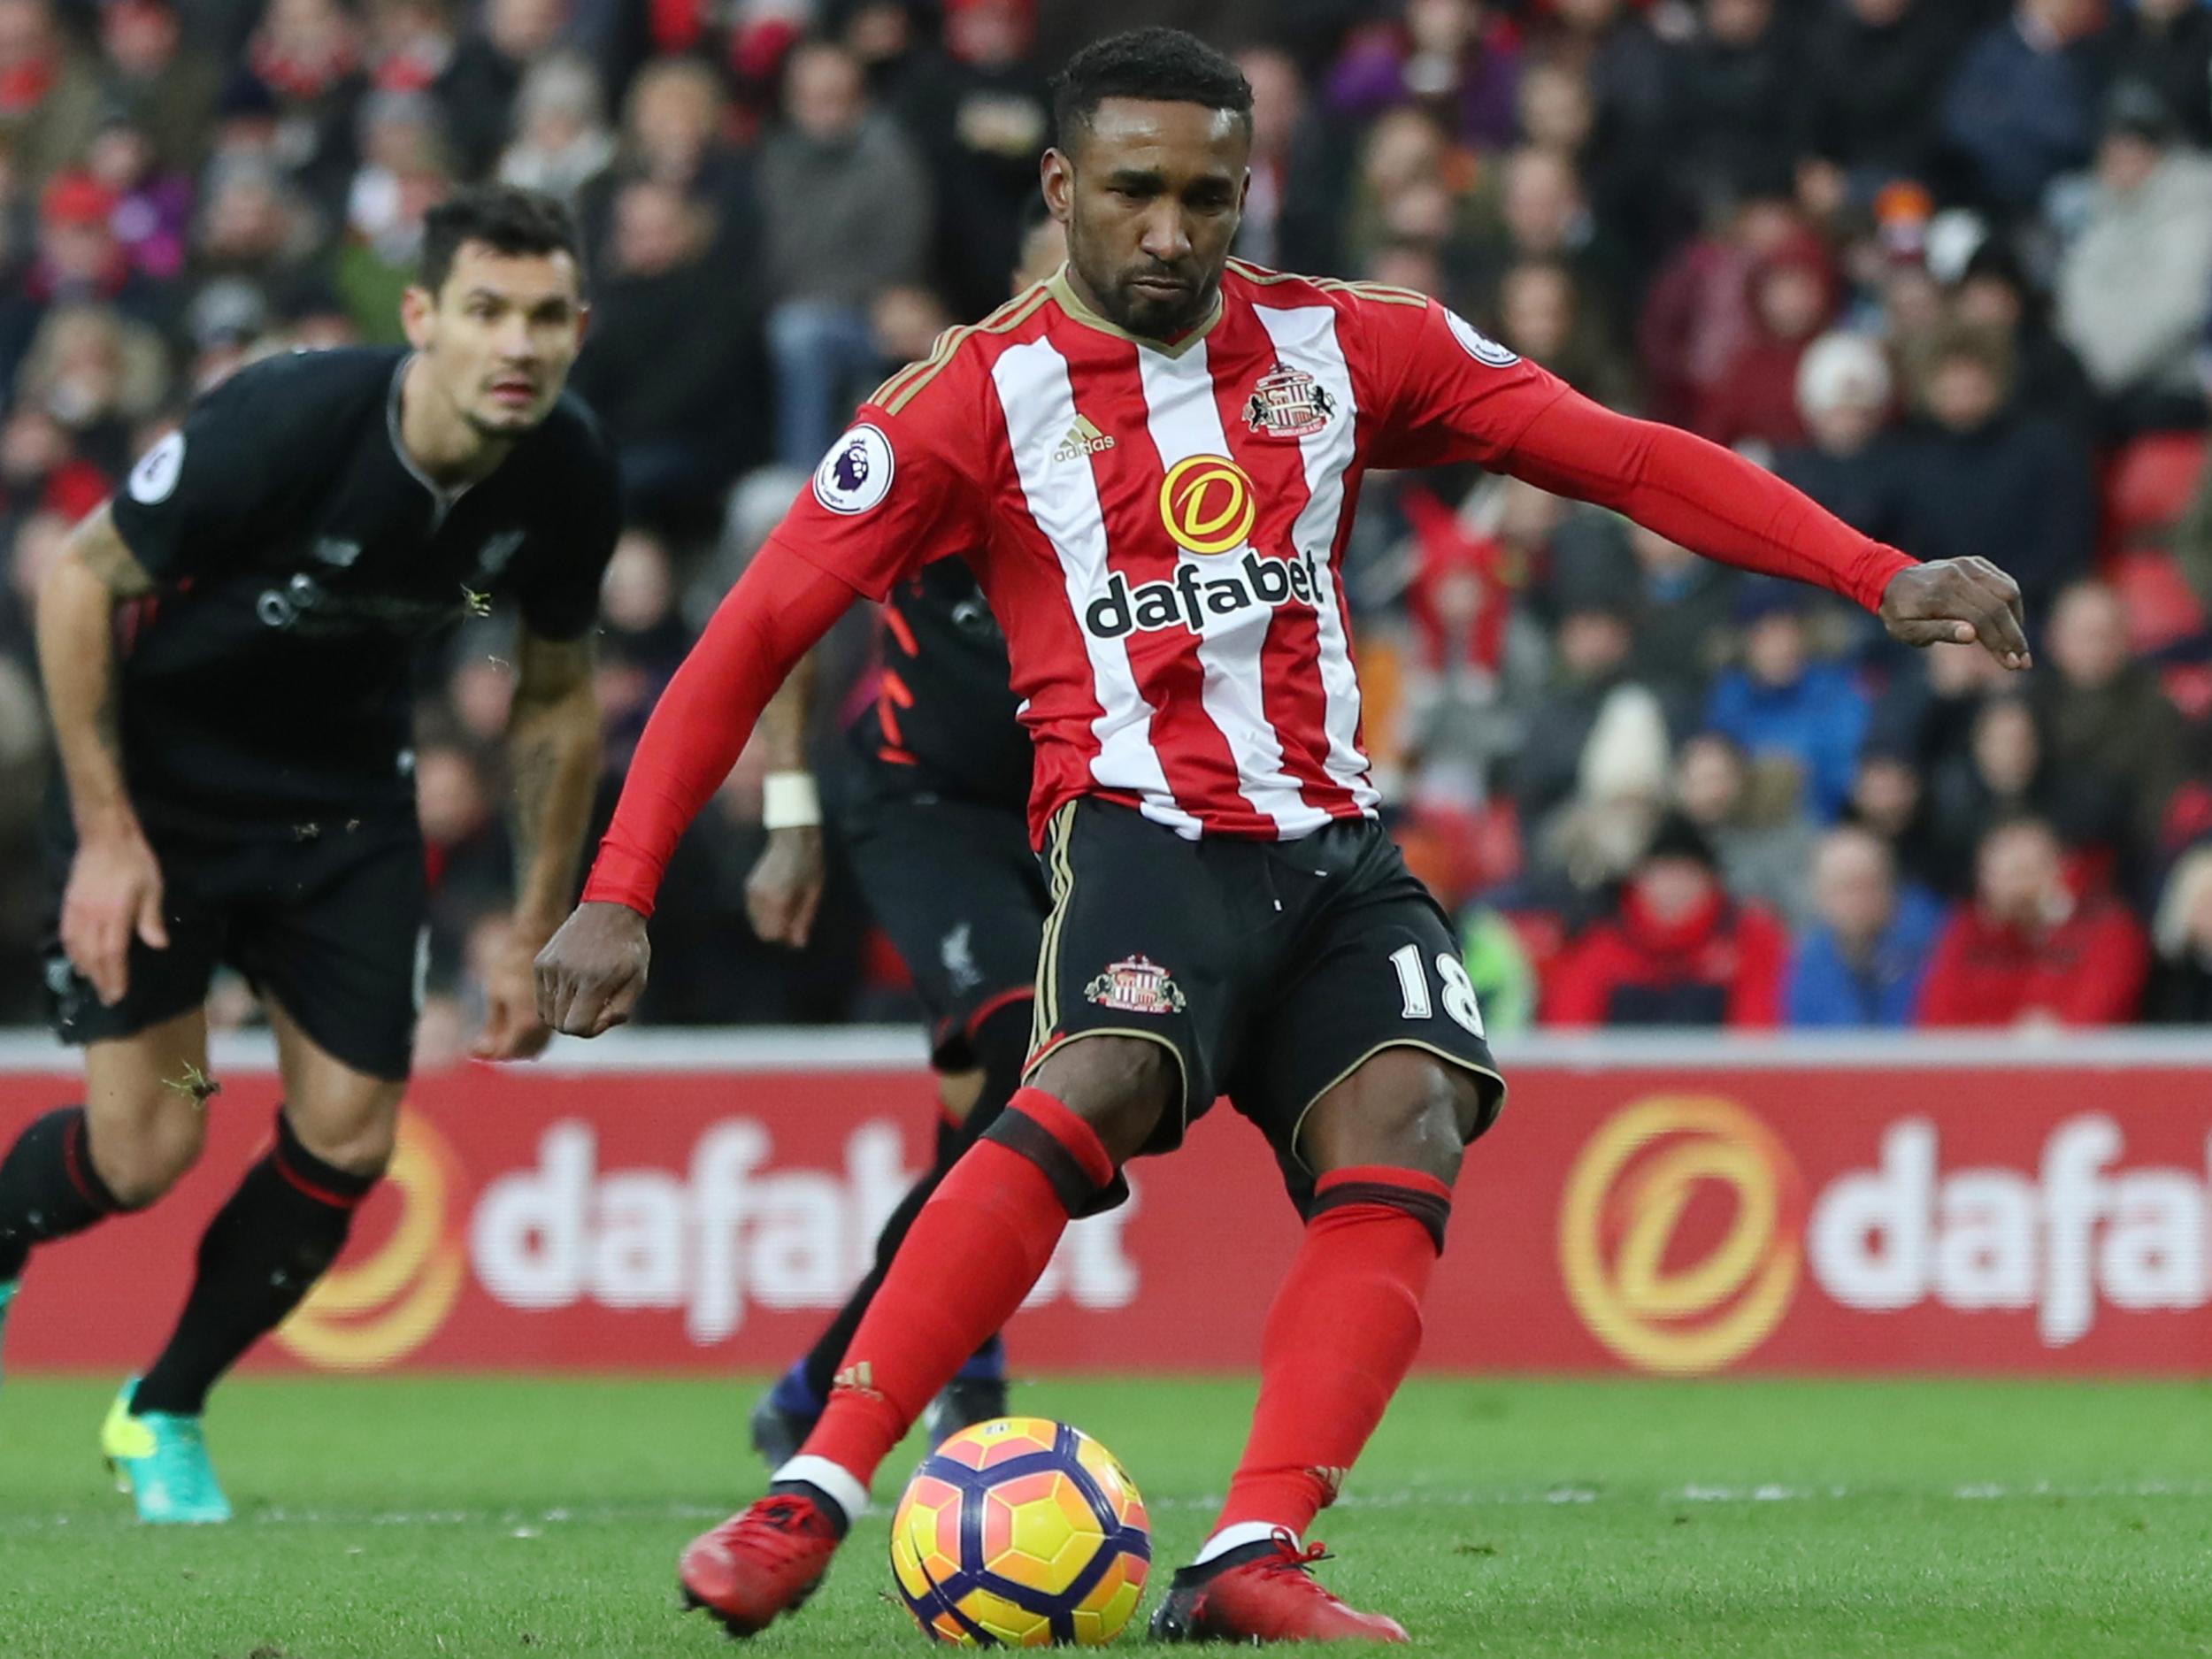 Defoe was the subject of a £6m bid from West Ham